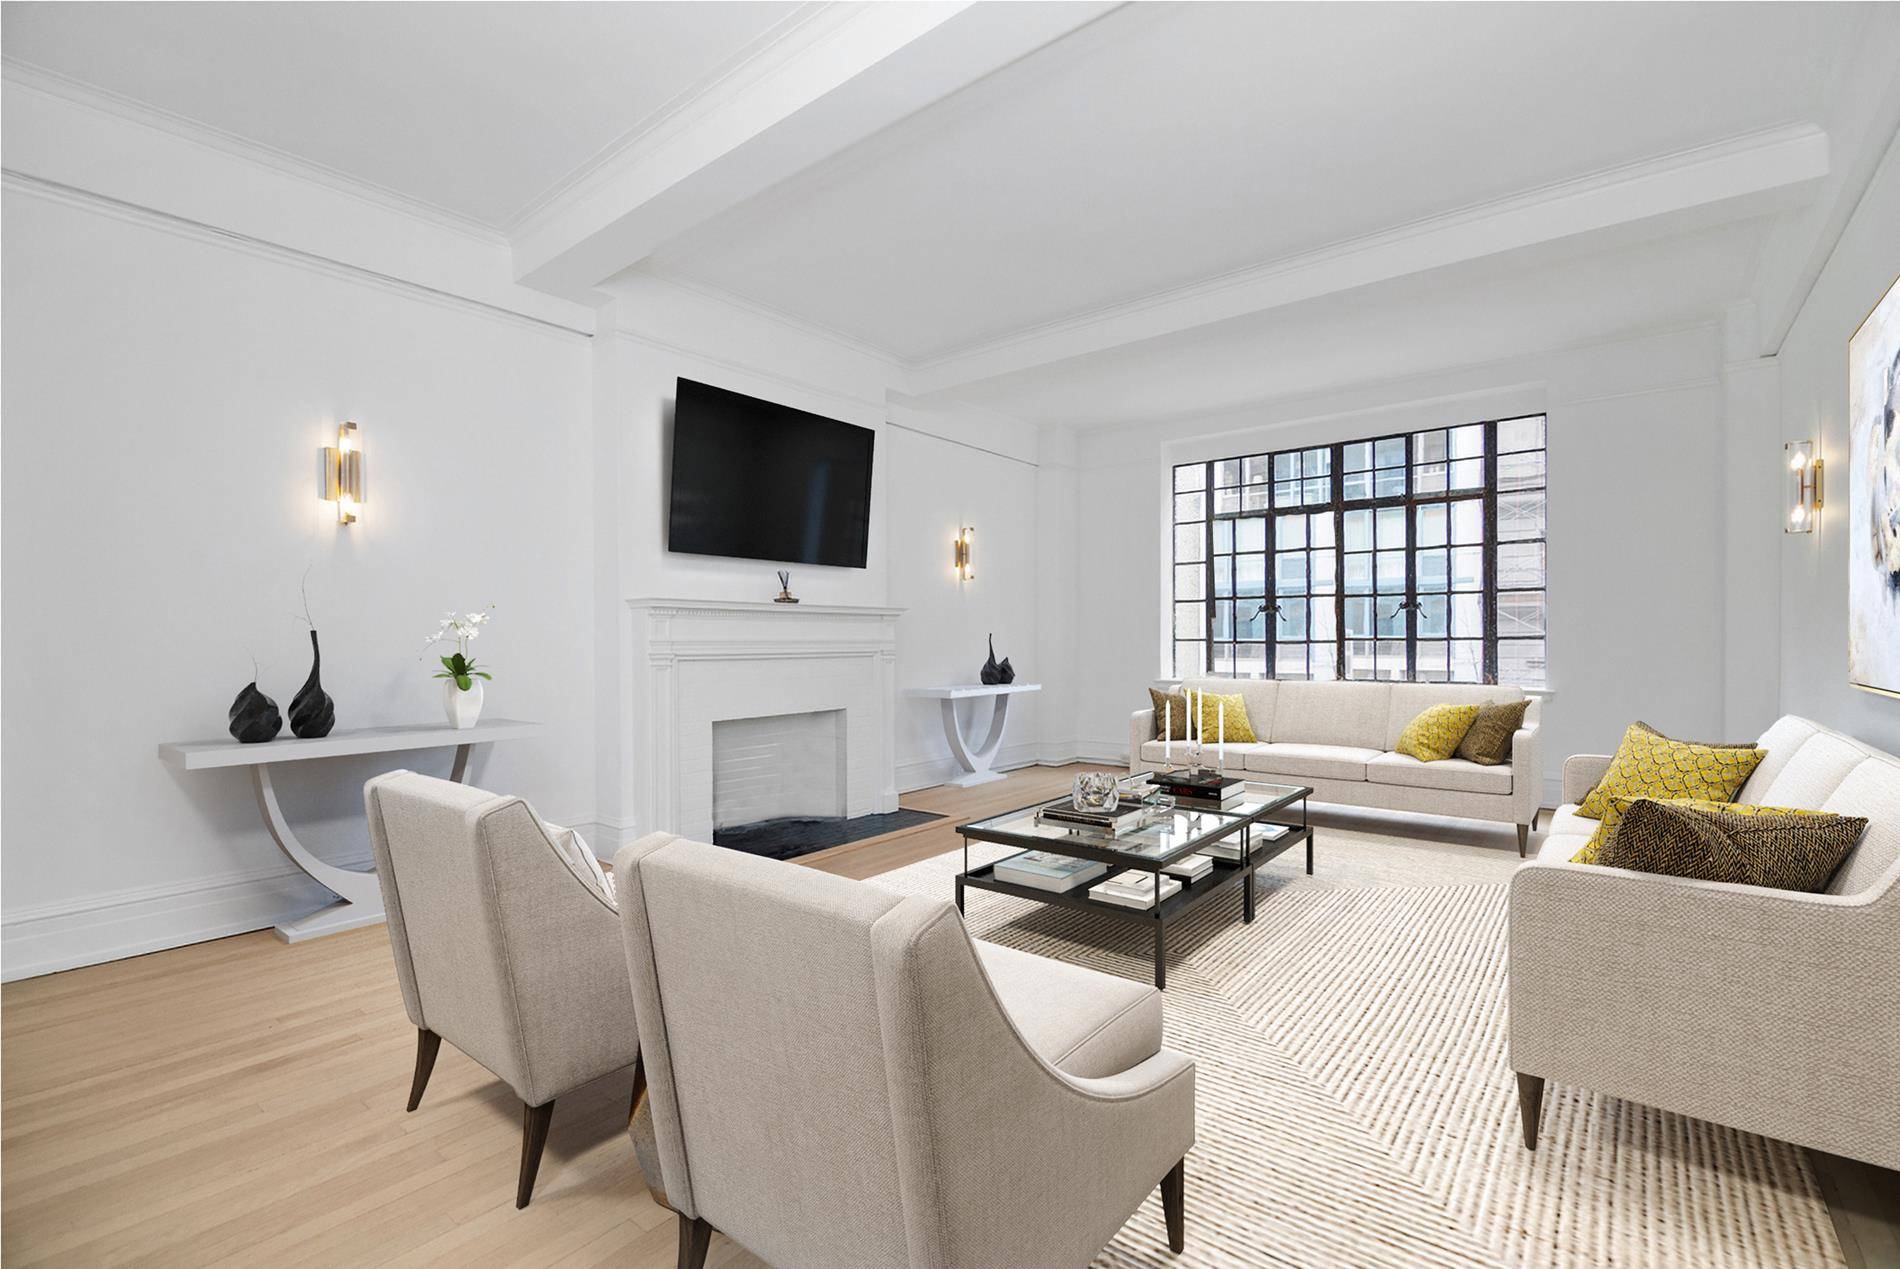 The most affordable Pre War Classic Six, convertible to a true three bedroom, in move in condition is now available on East 57th Street.